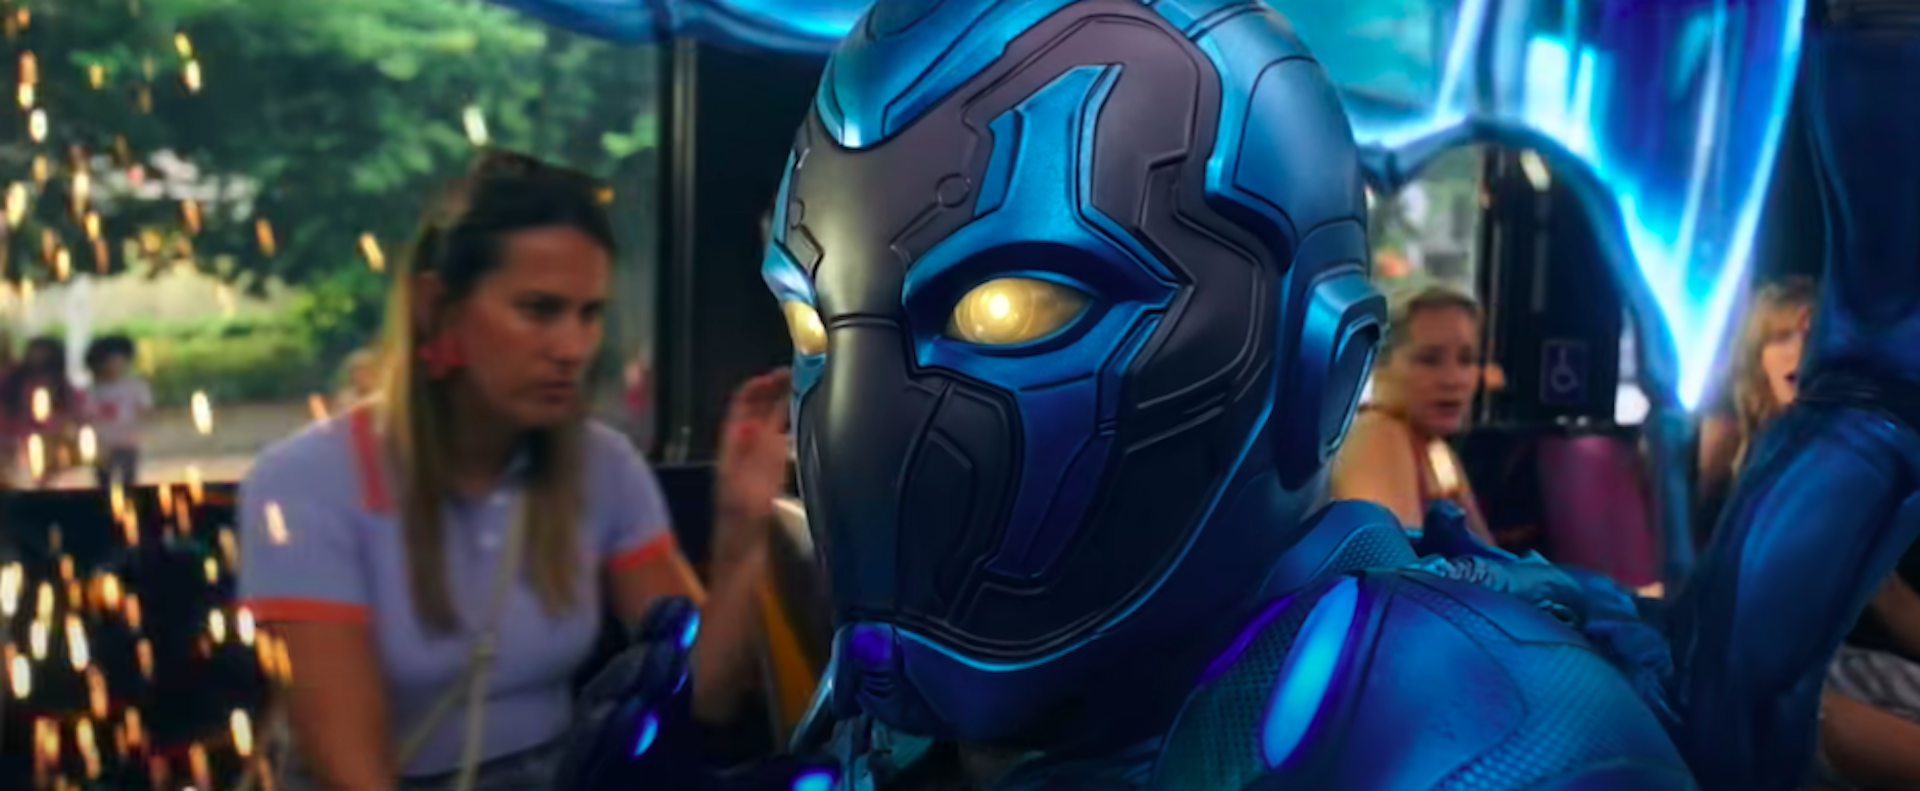 DC's New Movie Blue Beetle Release Date Announced